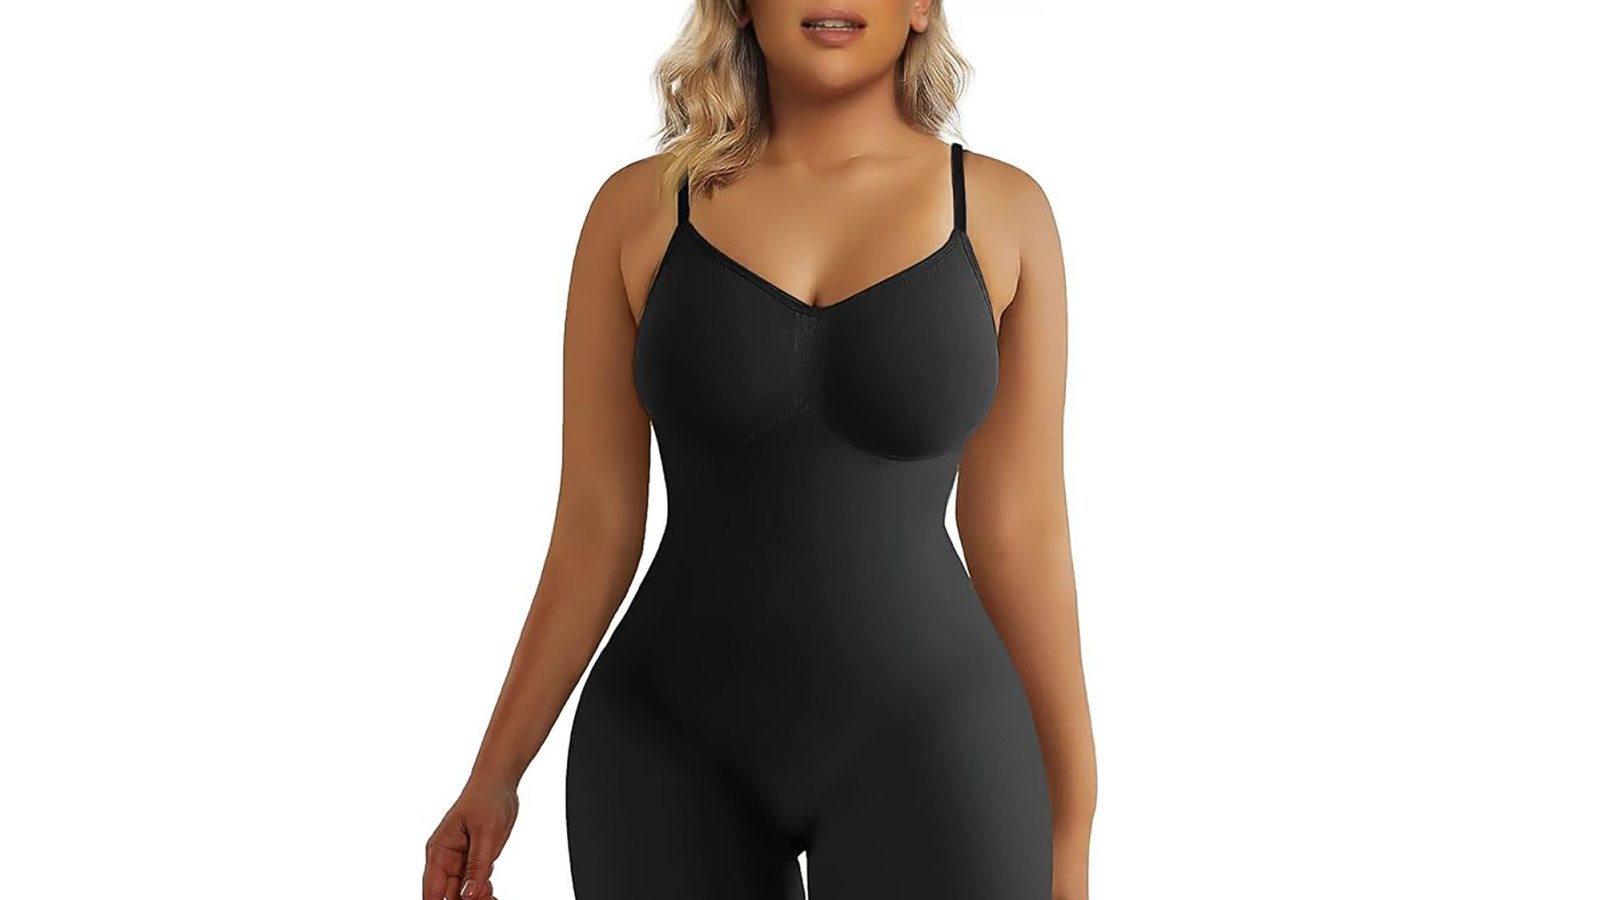 Yall know i love this brand but the new shapewear has made me obsessed